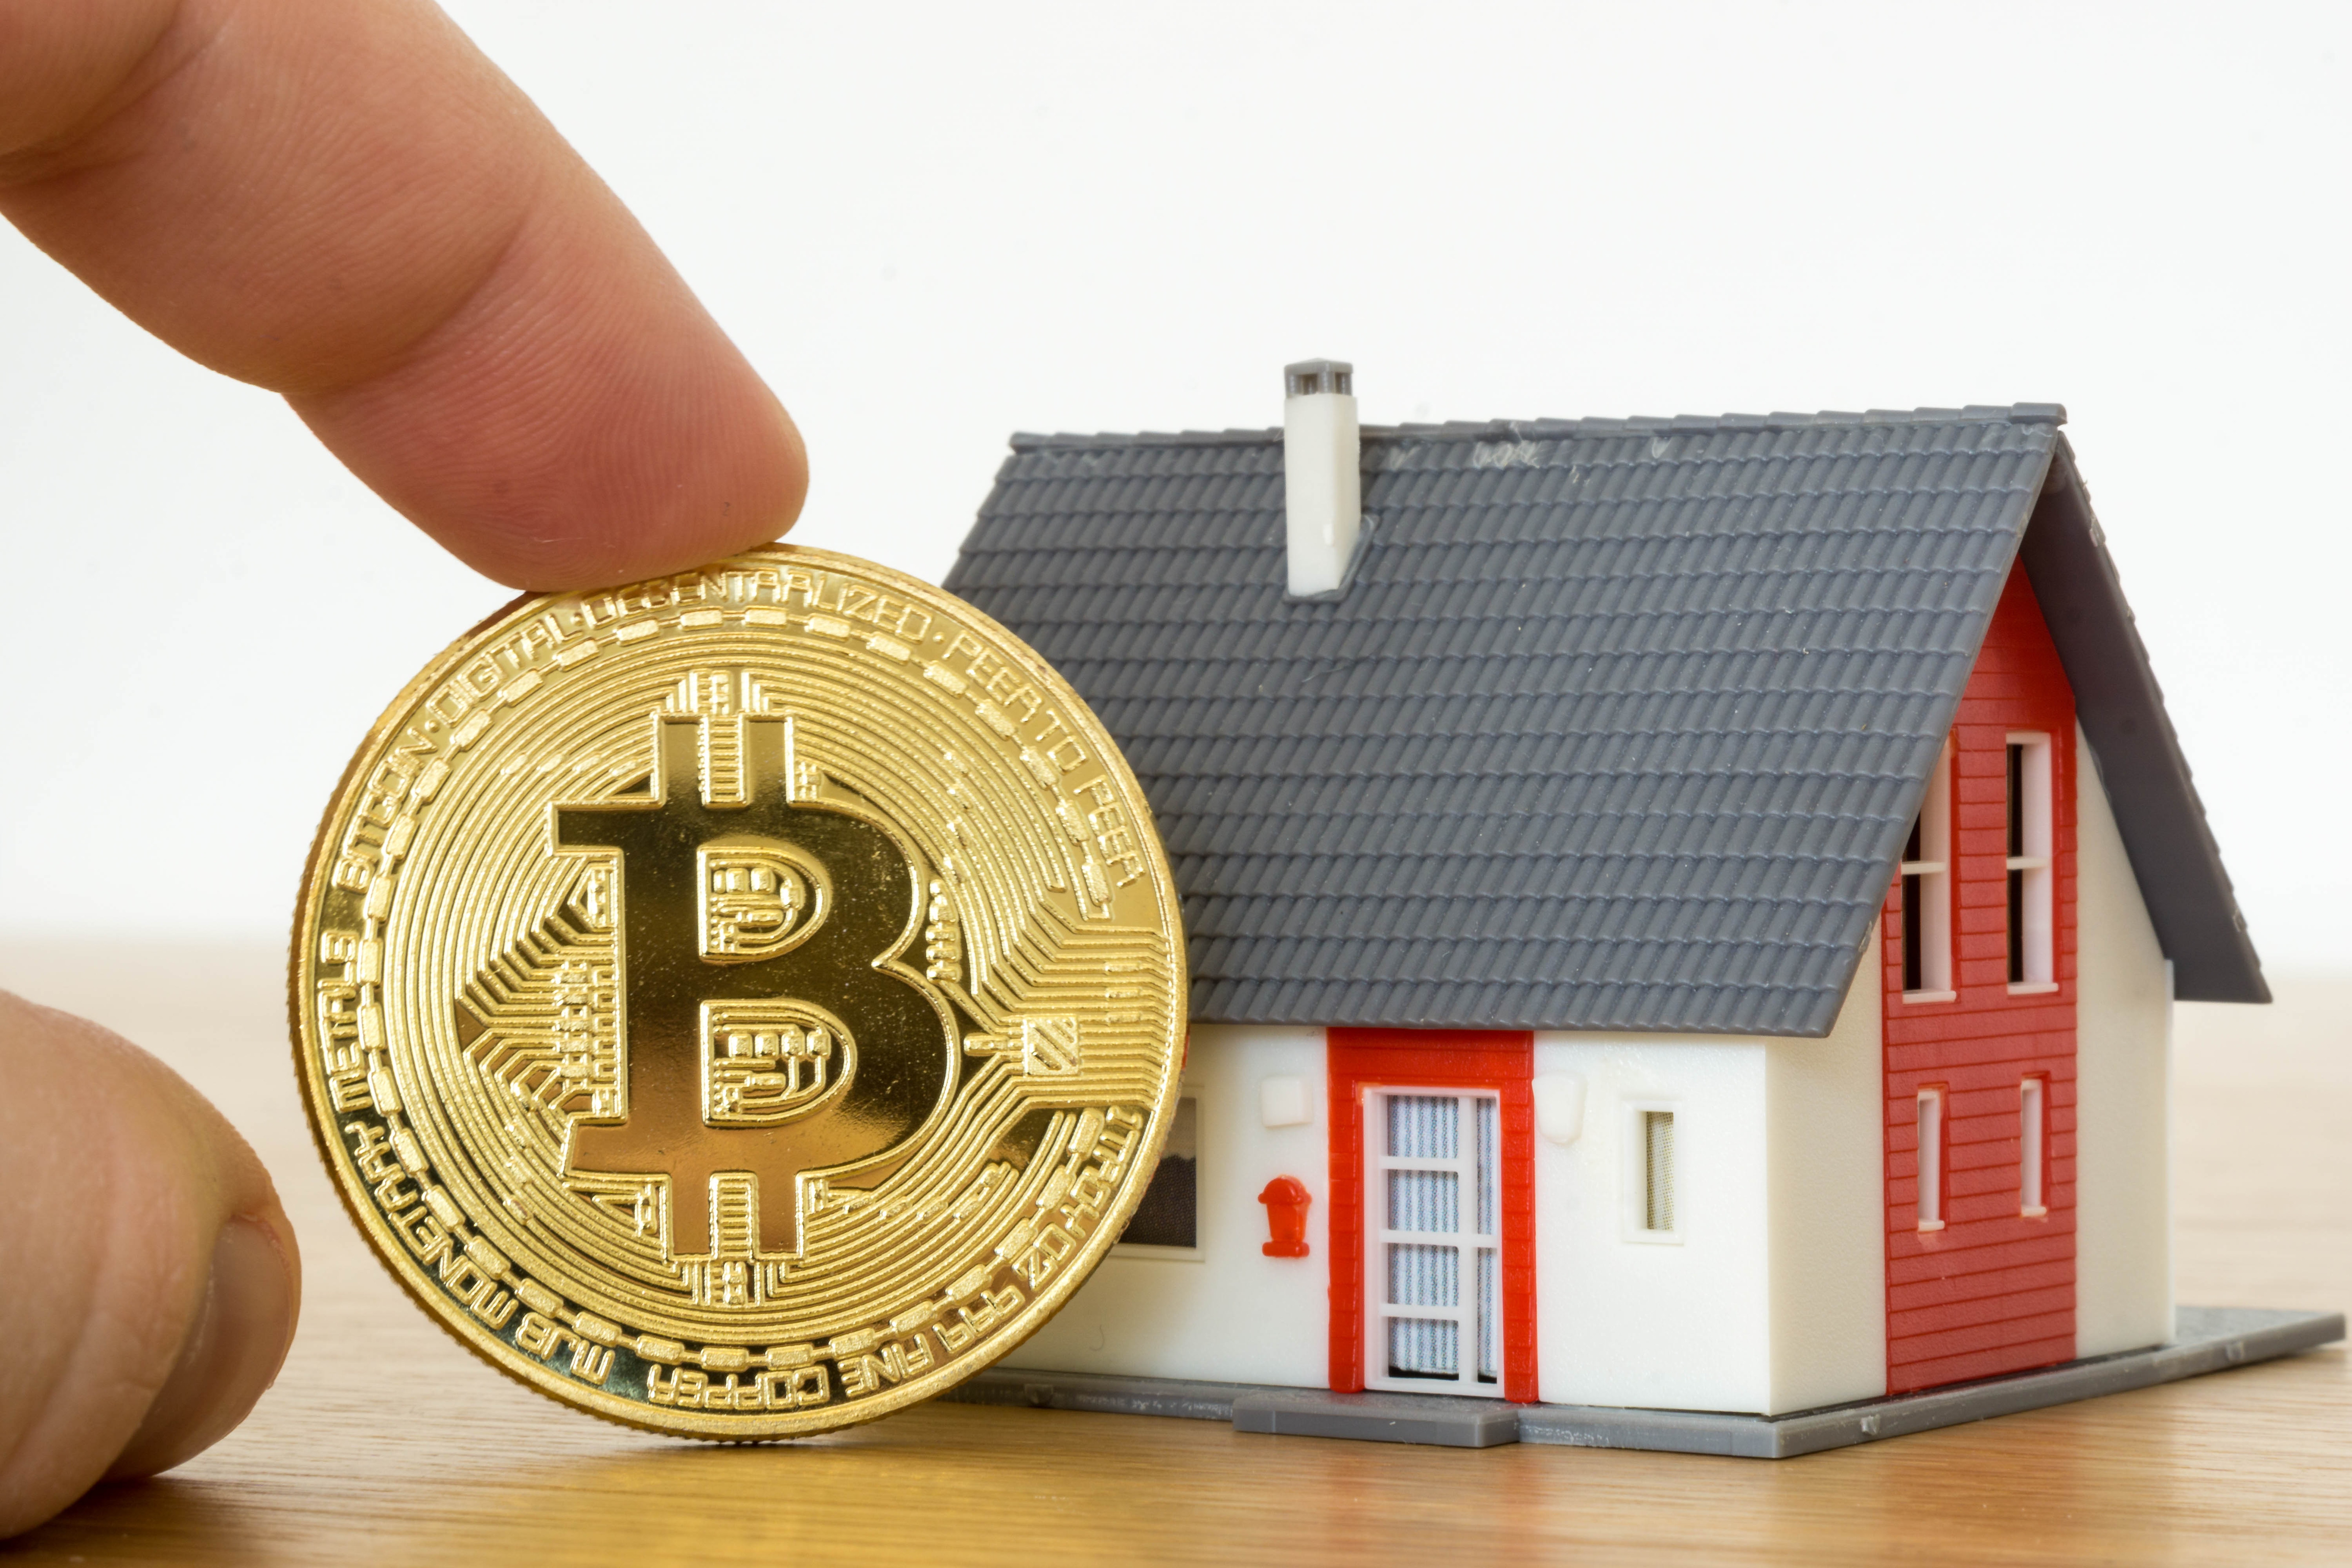 If You Invested $10,000 in Real Estate Instead of Bitcoin Last Year, Here is Where You Would be Now